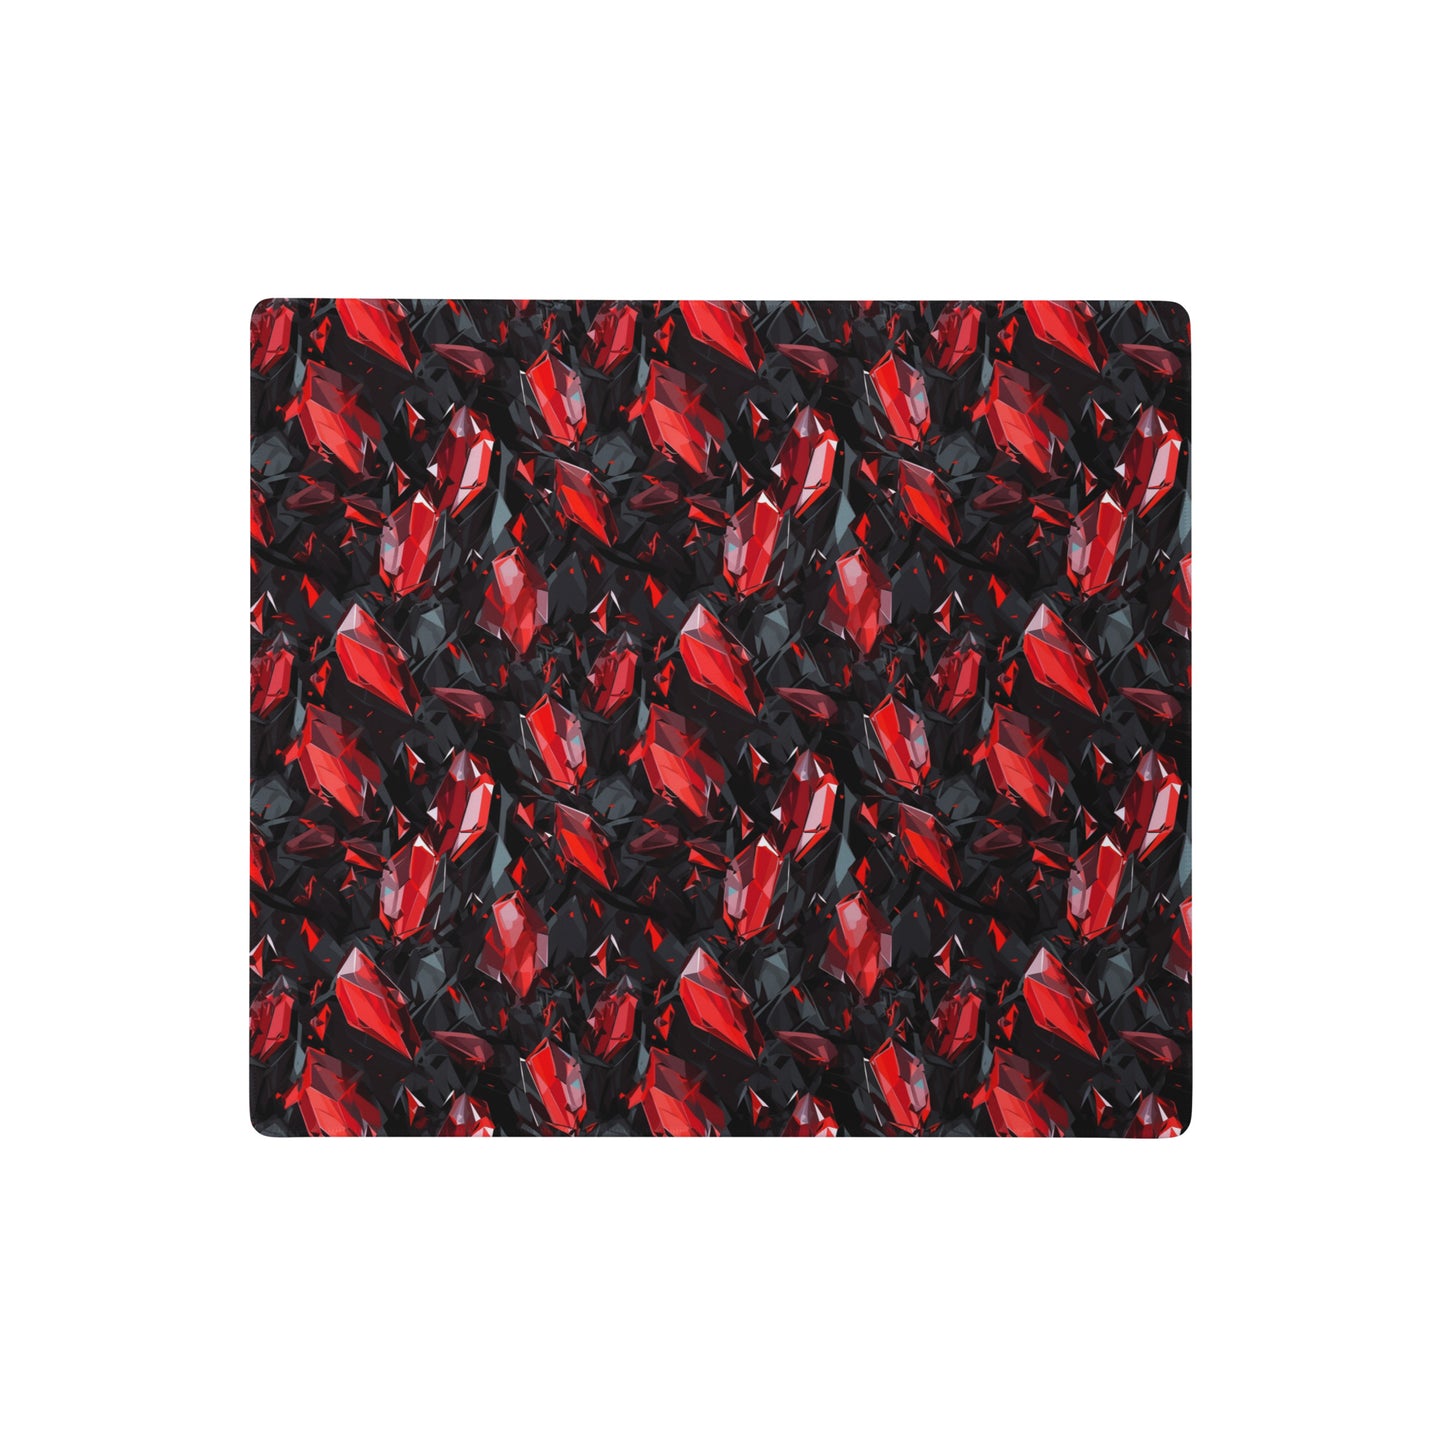 An 18" x 16" gaming desk pad with black and red crystals.